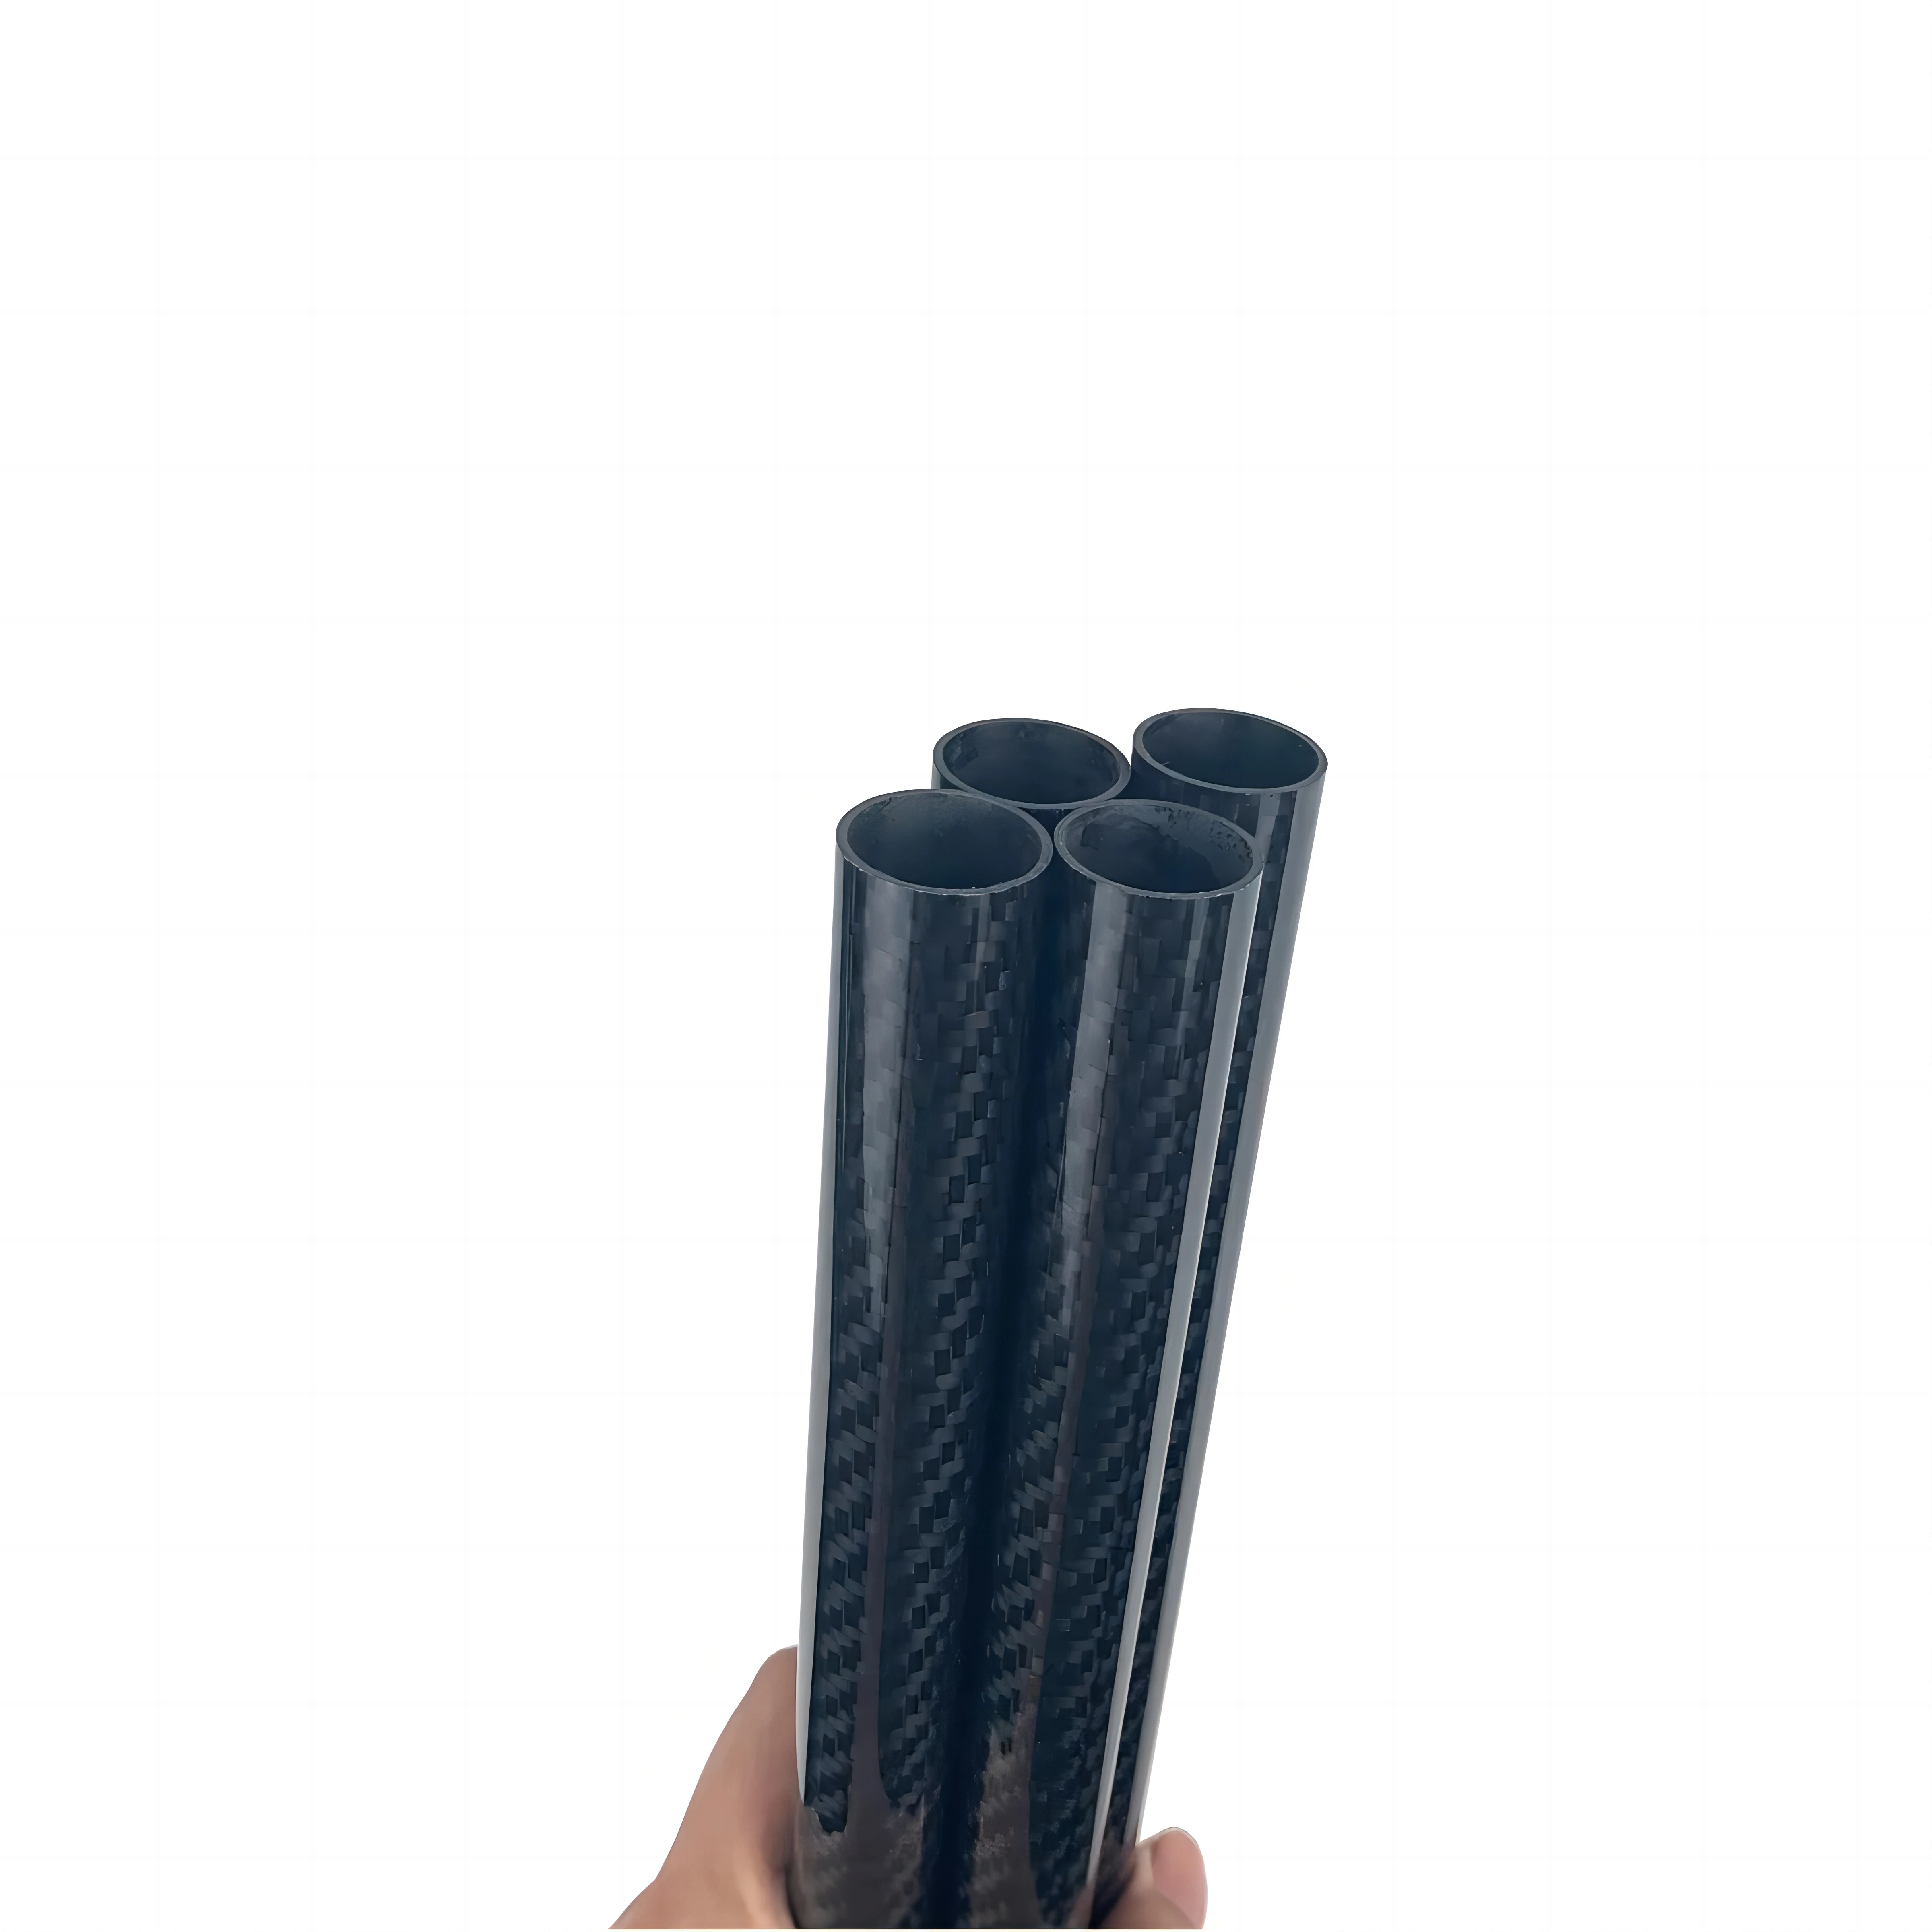 2Pcs 3k Full Carbon Fiber Tube Twill Glossy Hard Pipe Length 500mm Diameter 5mm to 30mm for RC Airplane Drone Parts DIY Usage